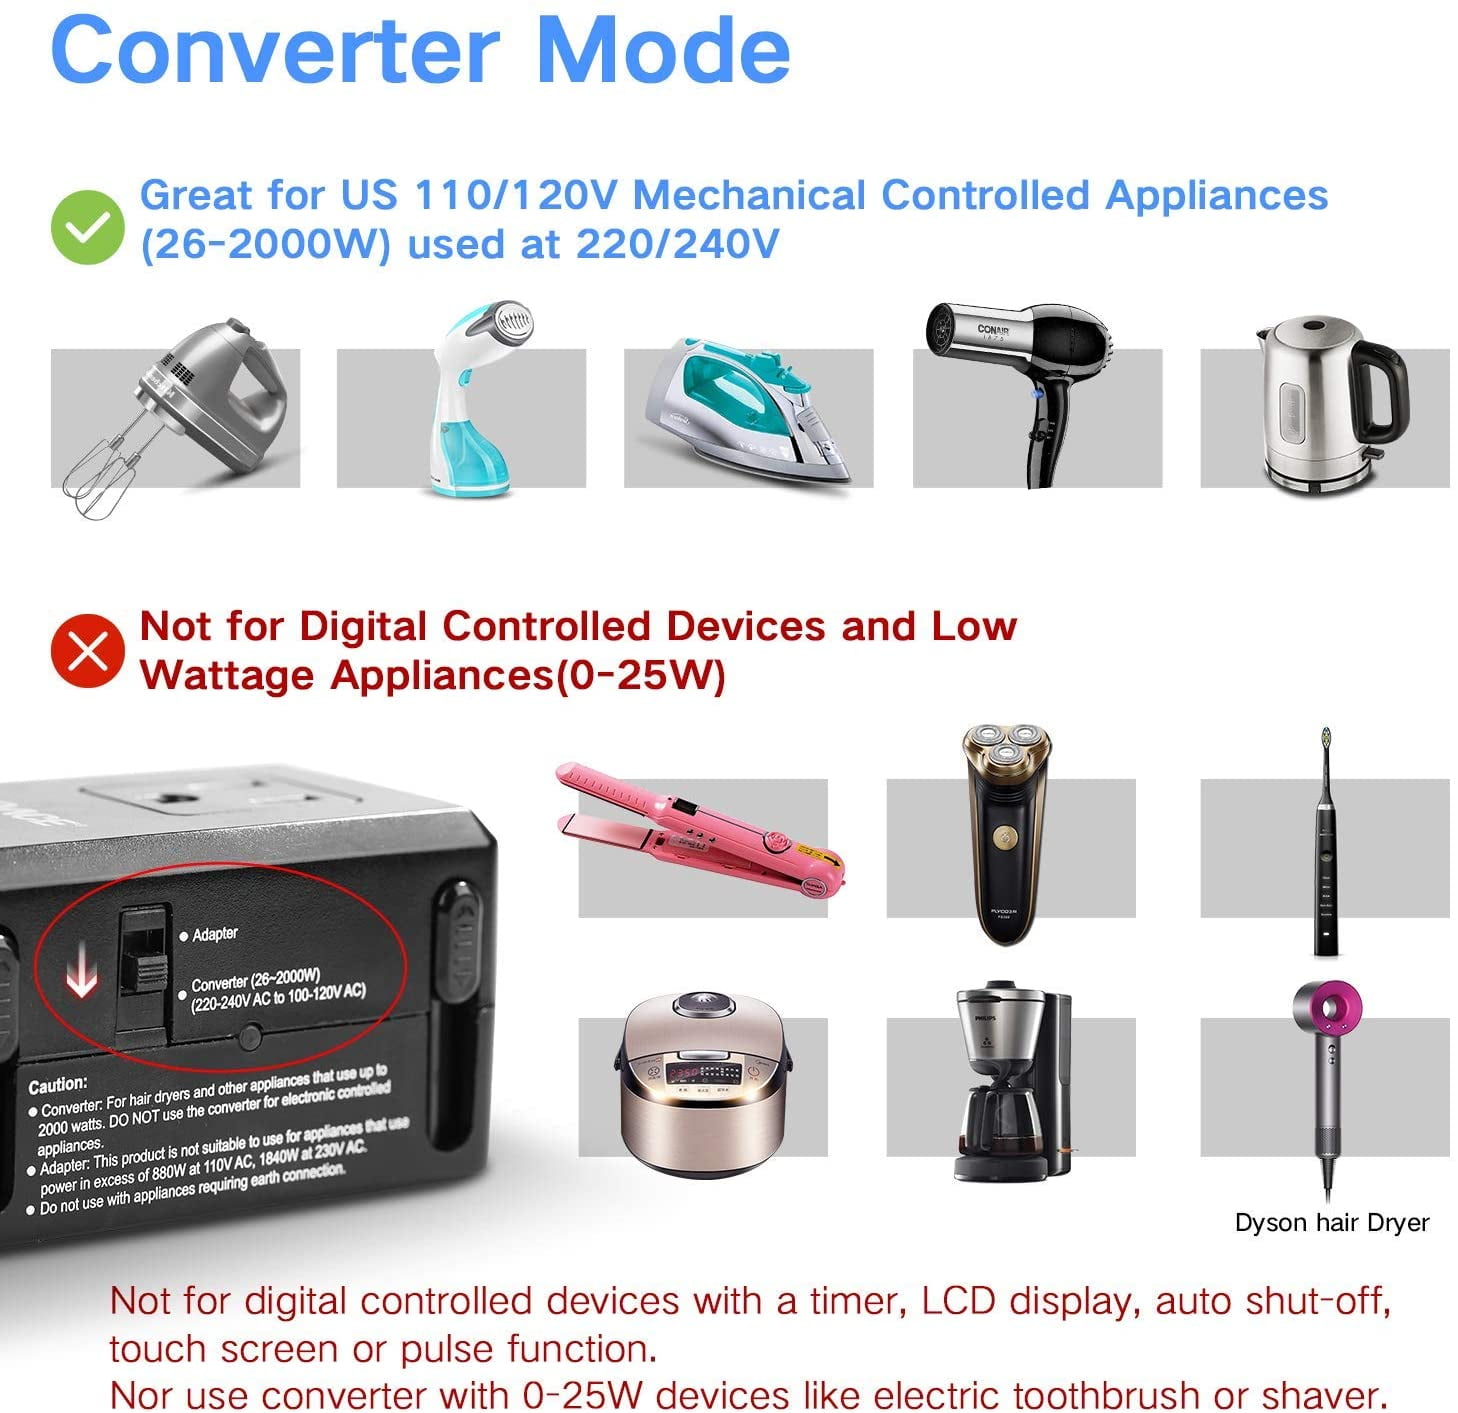 8A Travel Power Adapter for Laptop MacBook Cell Phone 2000W Travel Adapter and Converter Combo DOACE Voltage Converter 220V to 110V for Hair Dryer Steam Iron US to UK Europe AU Over 190 Countries 